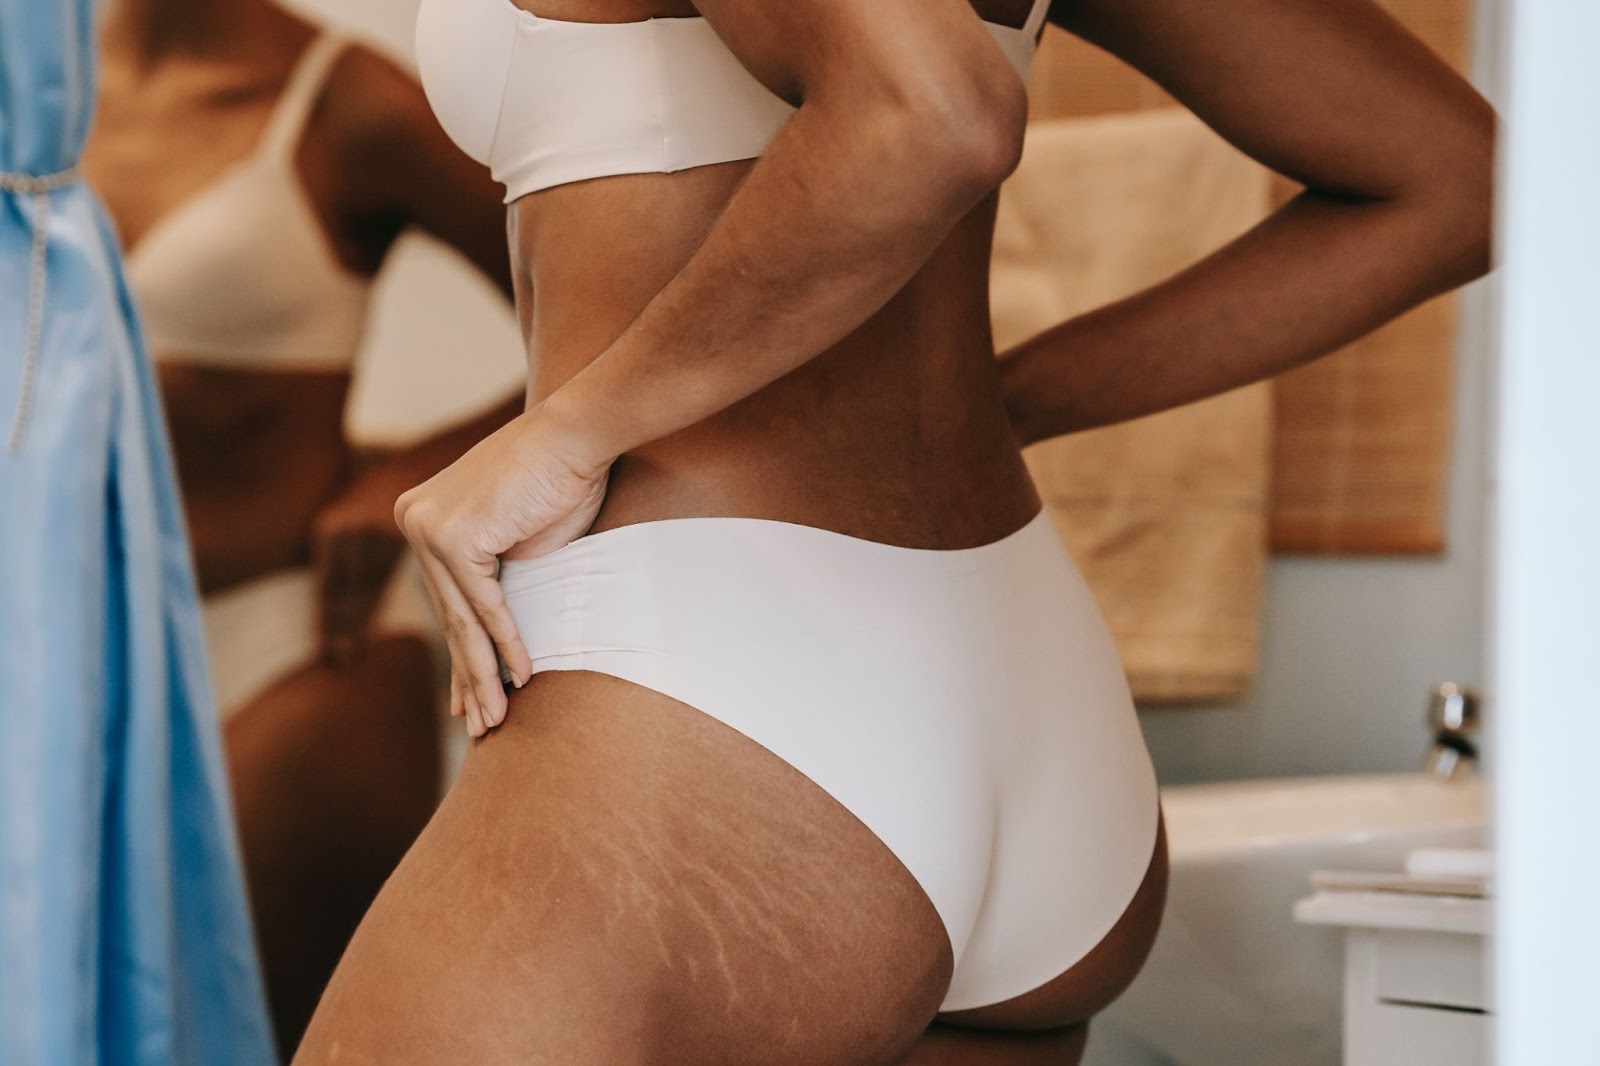 Butt Acne: How to Treat These Annoying Breakouts Bawdy Beauty